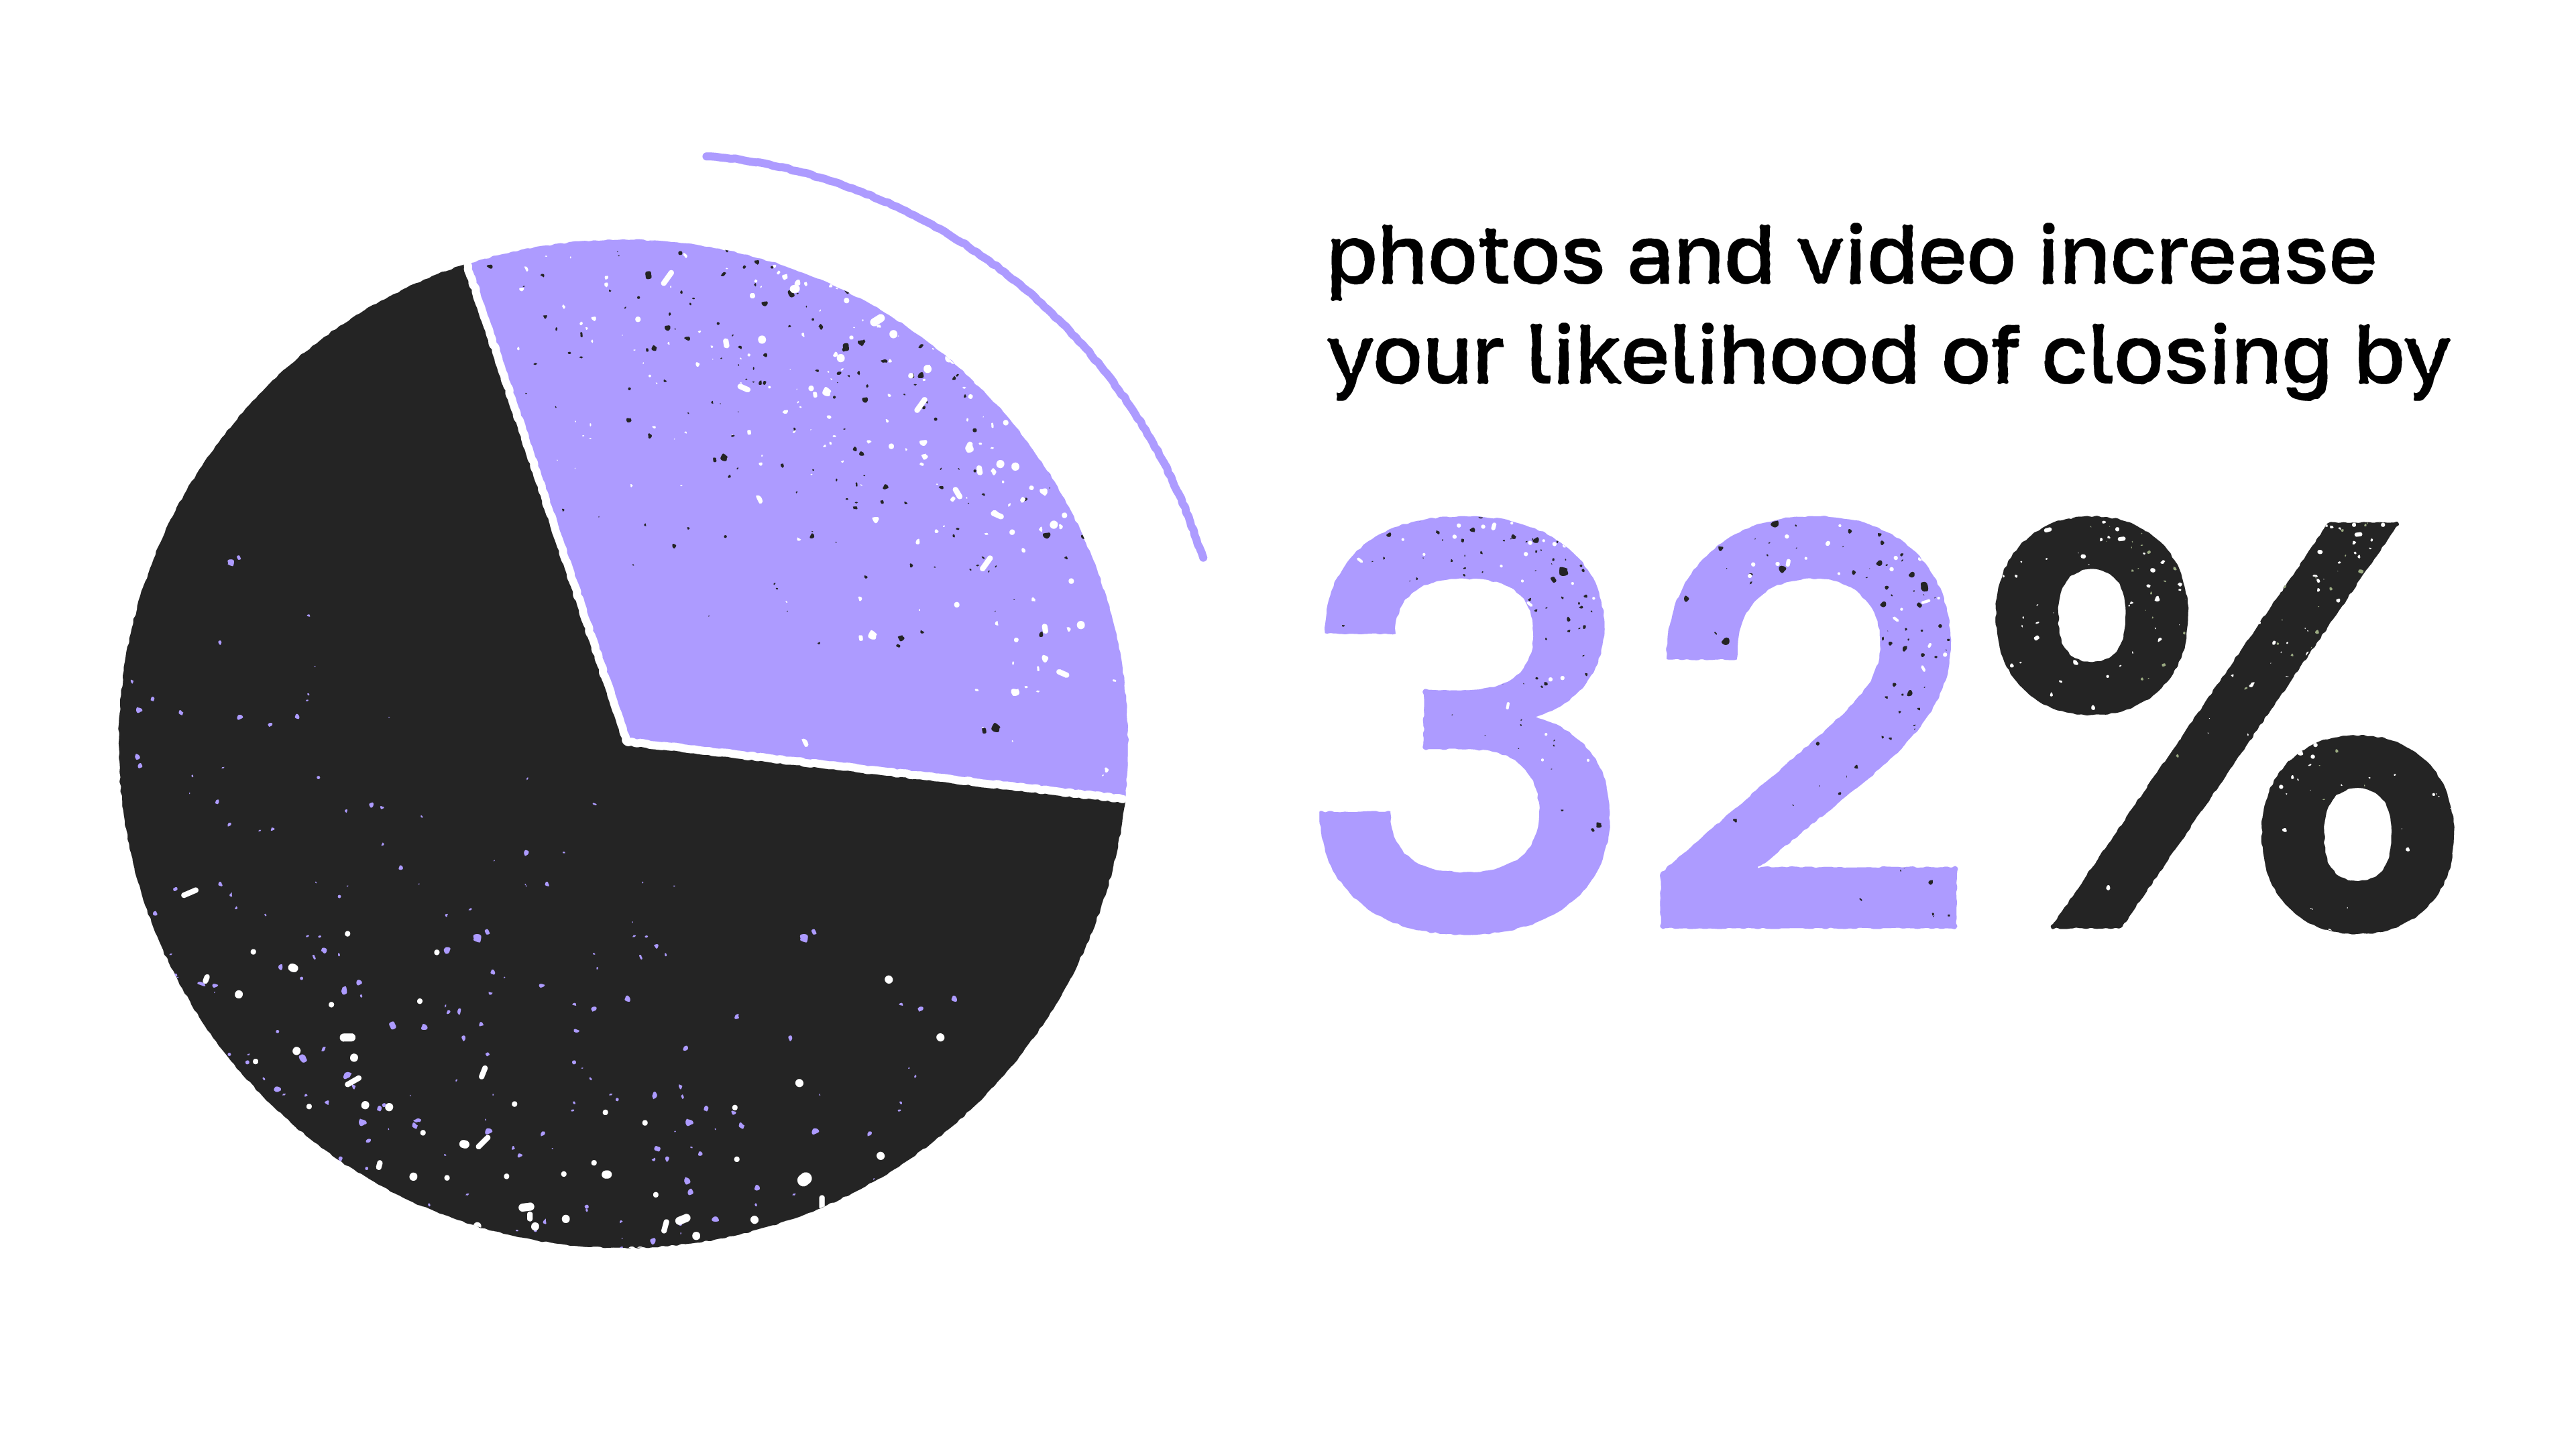 A banner which states, “Photos and video increase your likelihood of closing by 34%.”